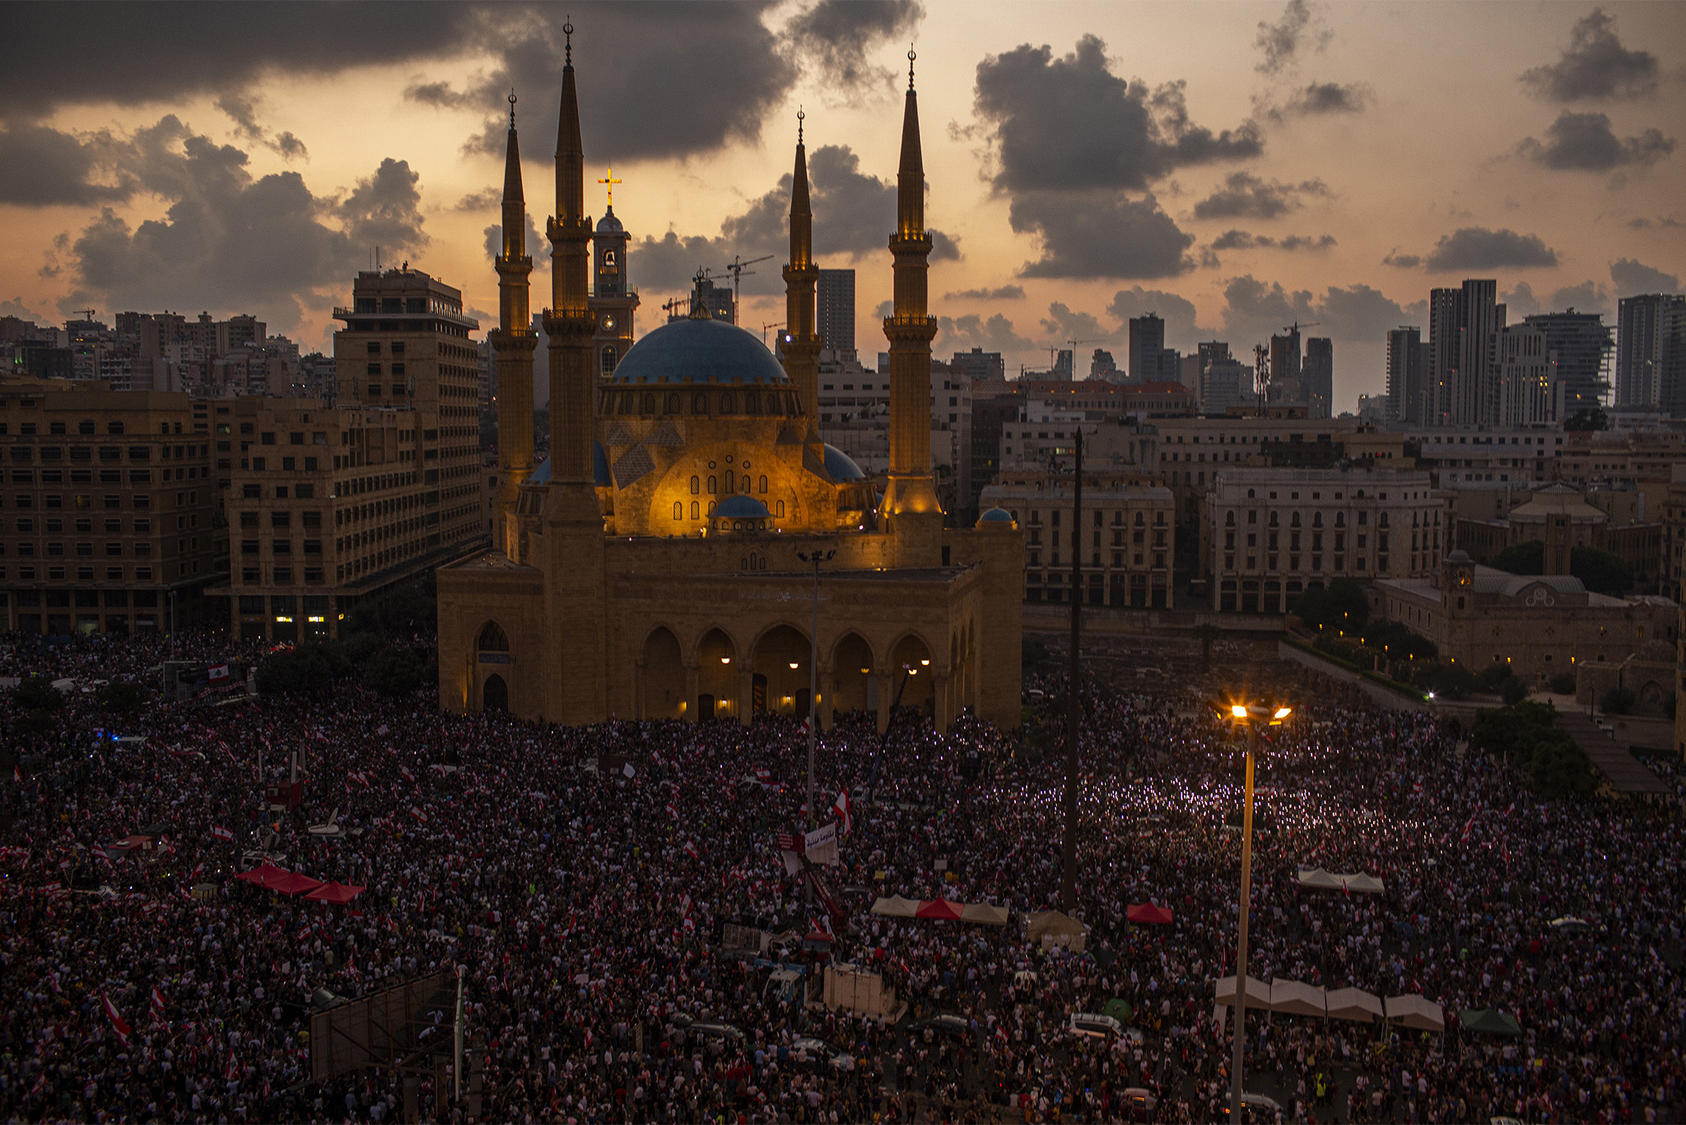 Protesters gather in front of the Mohammad al Amin mosque in downtown Beirut, Oct. 20, 2019. Lebanon’s 2019 protests, the largest since its independence, moved from fury over the economy and corruption to demands for a new political system. (Diego Ibarra Sanchez/The New York Times)